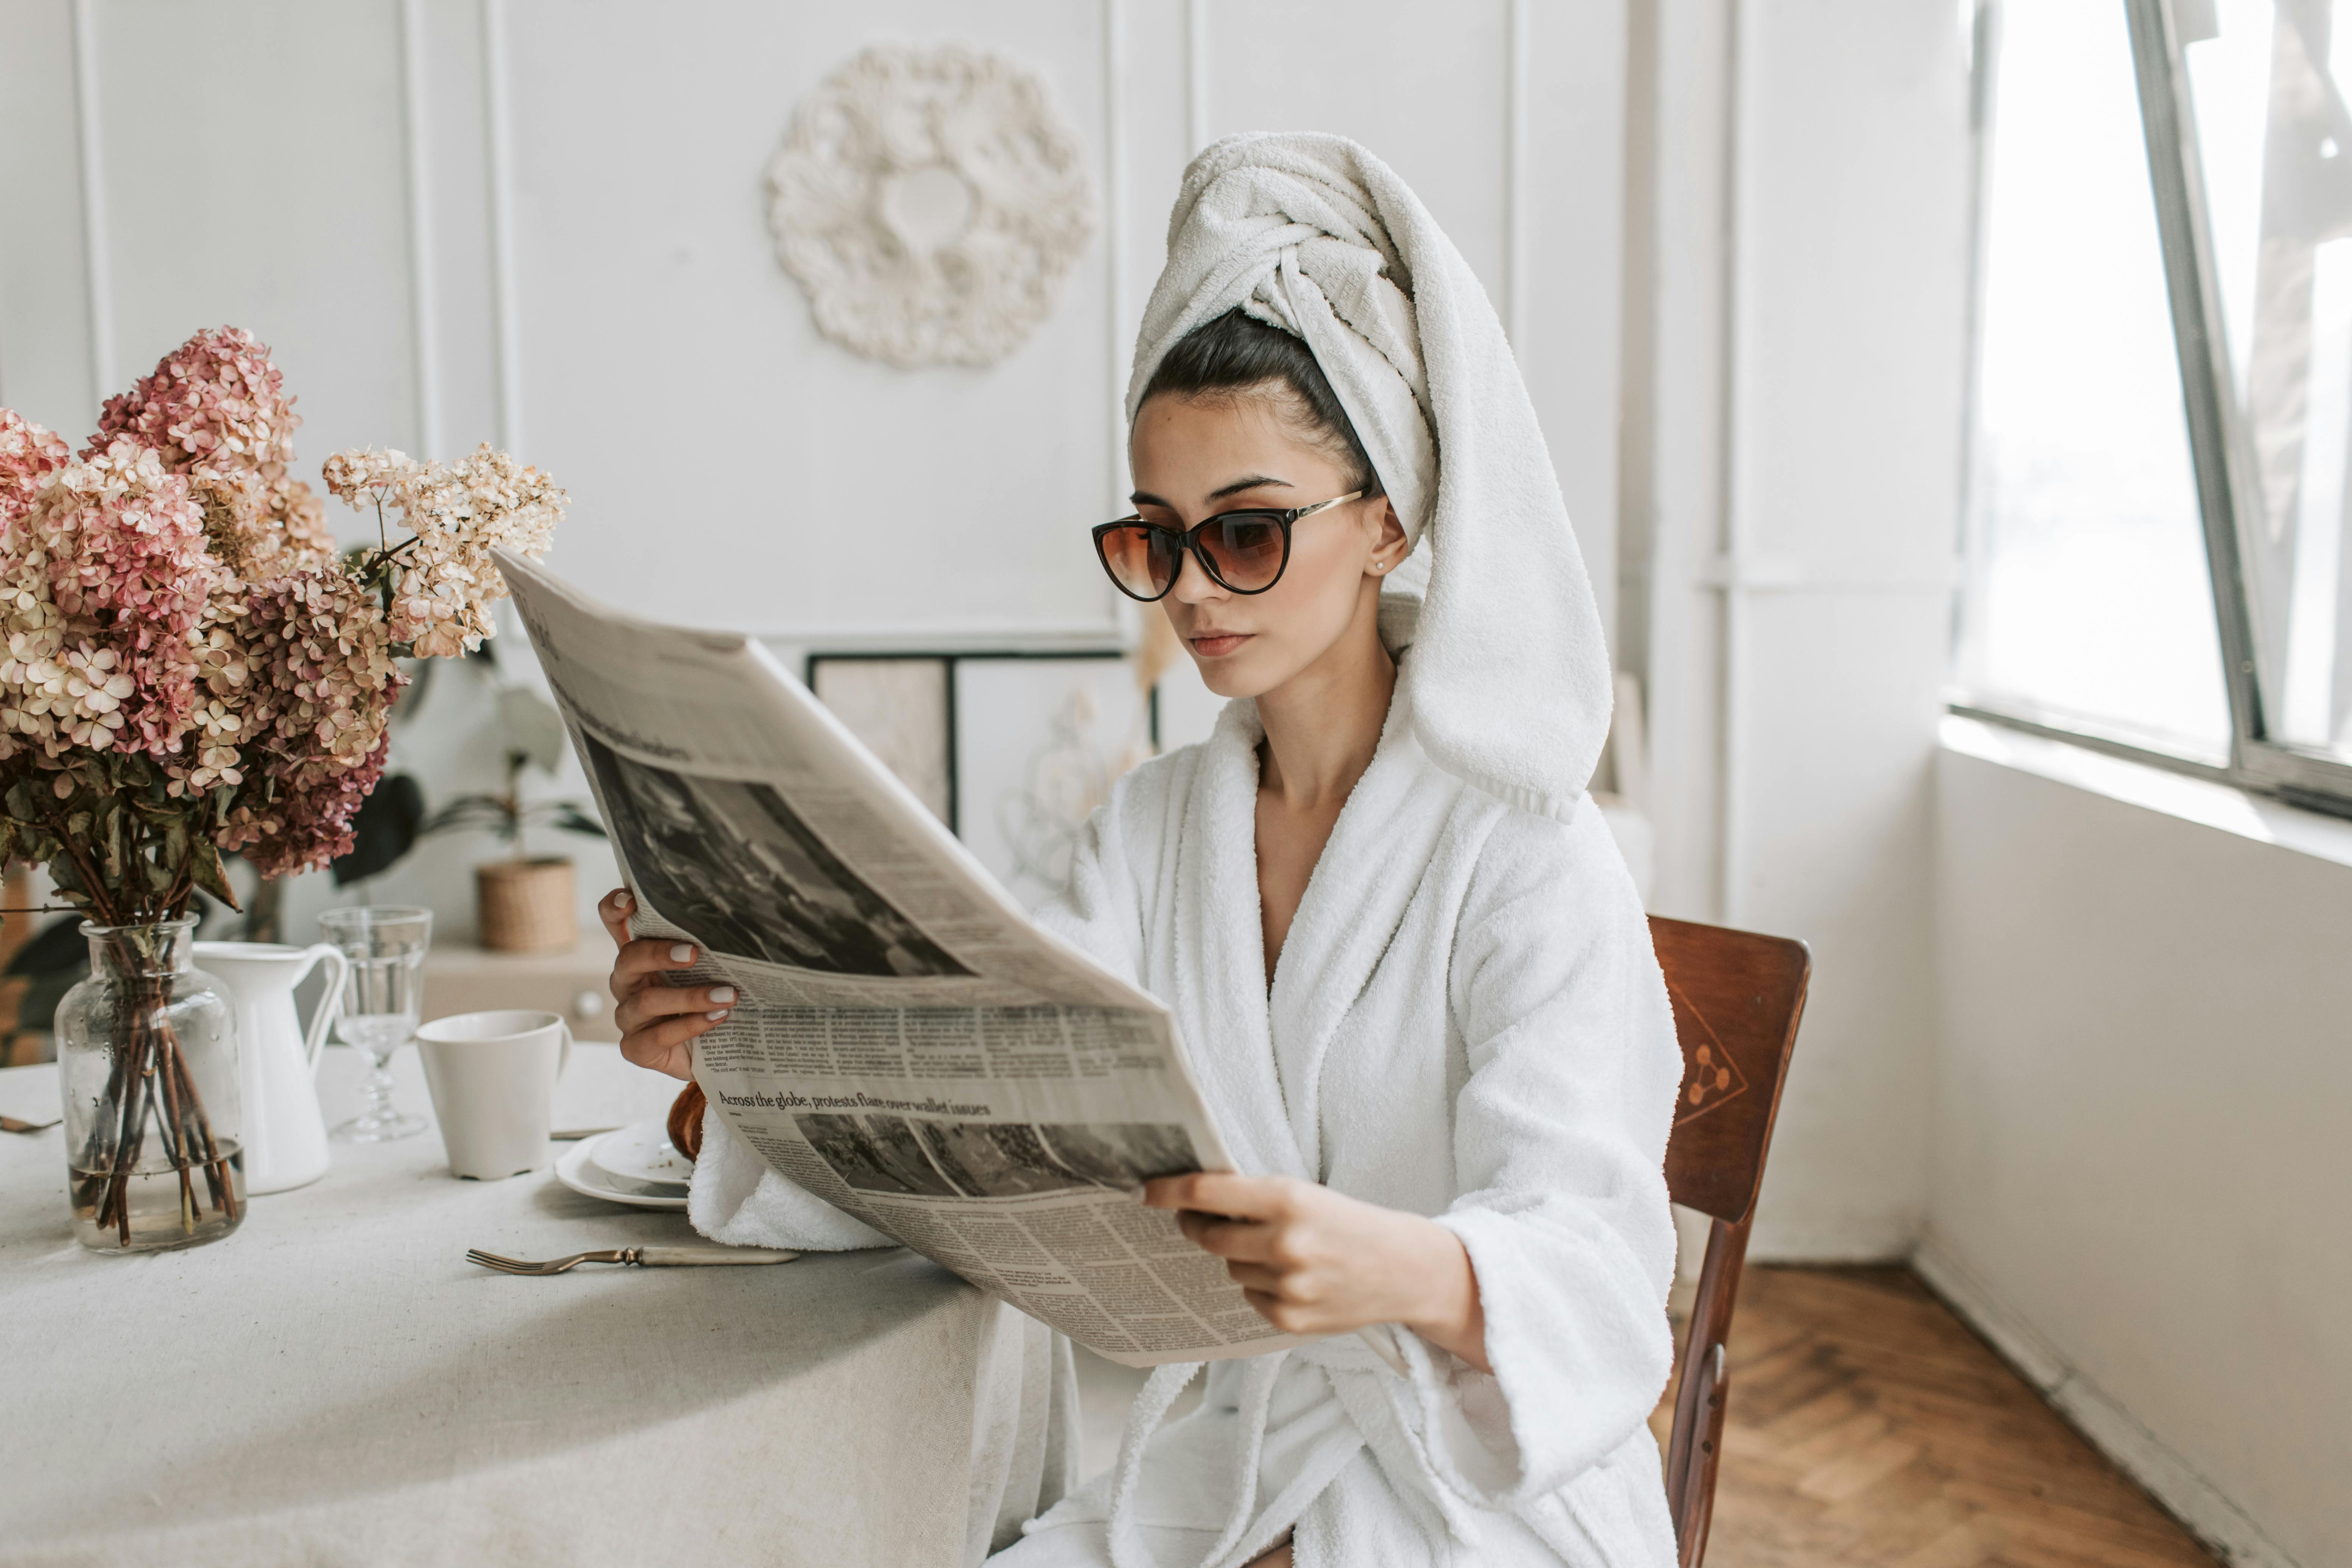 Woman in White Robe Wearing Sunglasses while Reading a Newspaper